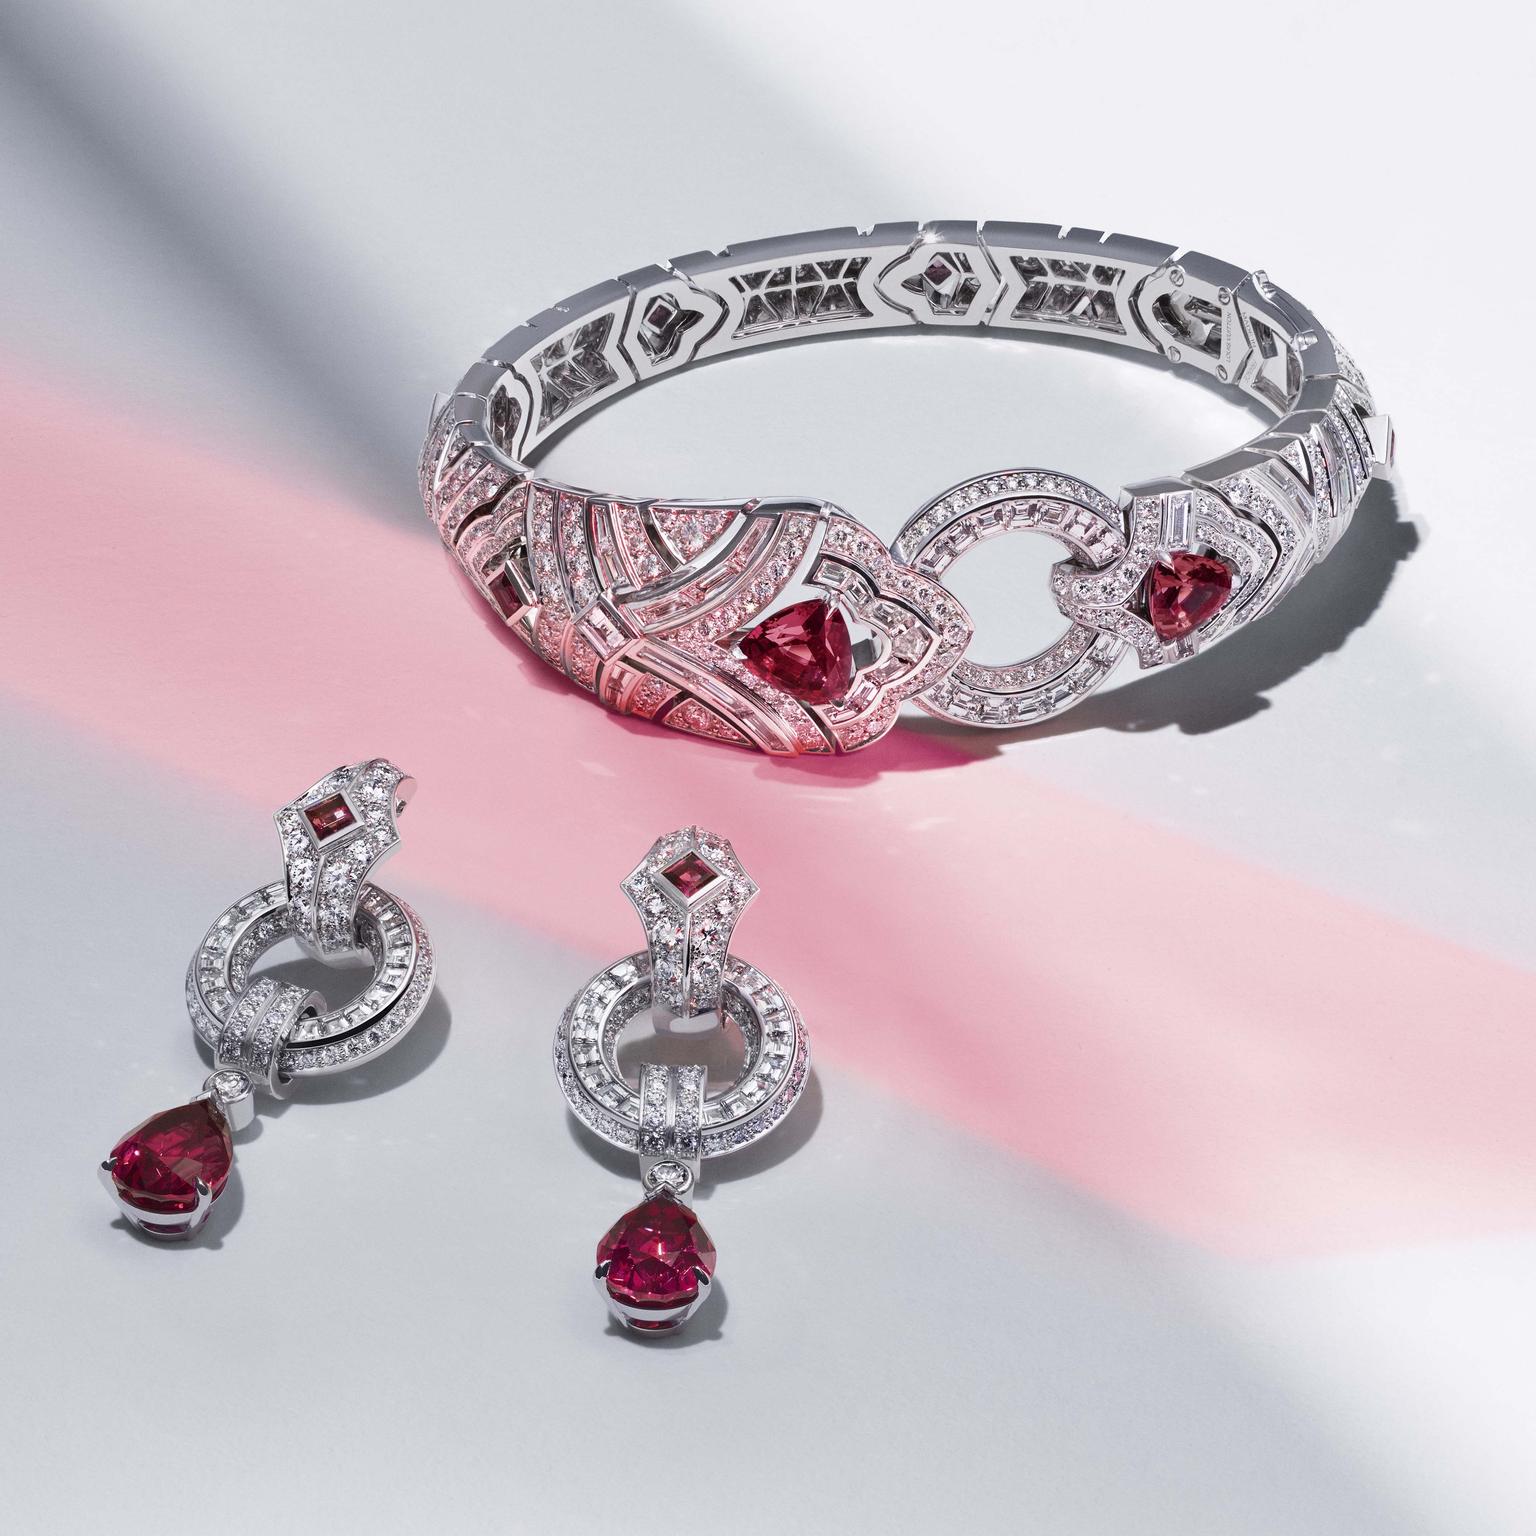 Louis Vuitton Riders of the Knights The La Cavaliere diamond and red spinel bracelet and earrings